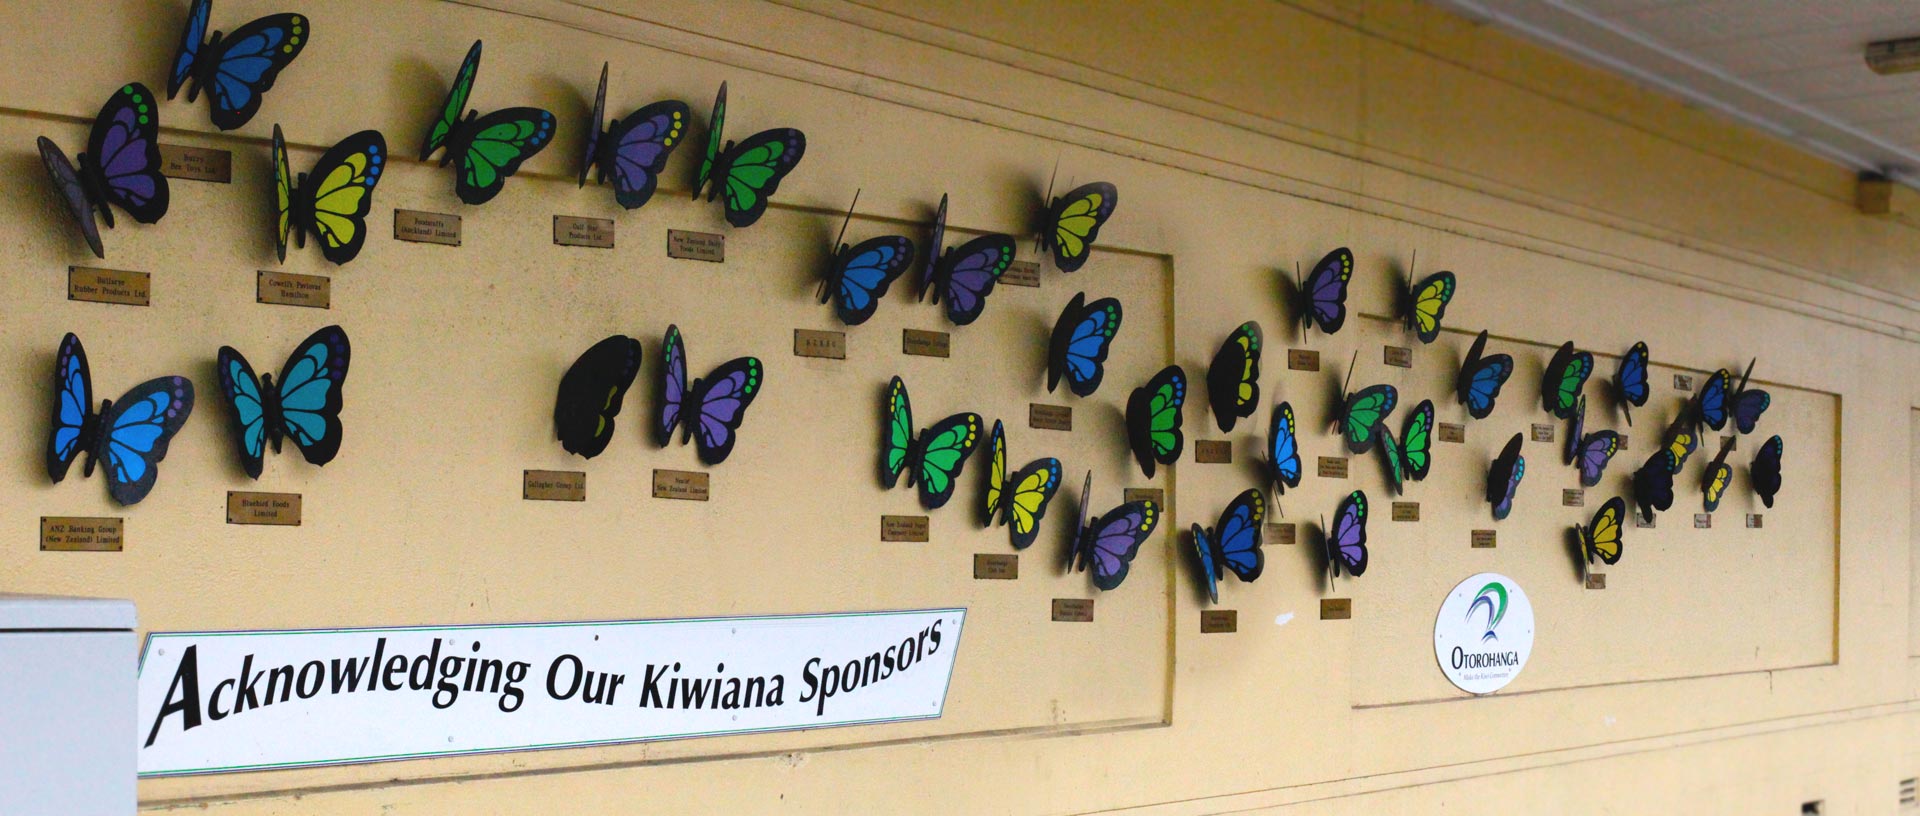 SEE OUR BUTTERFLY WALL